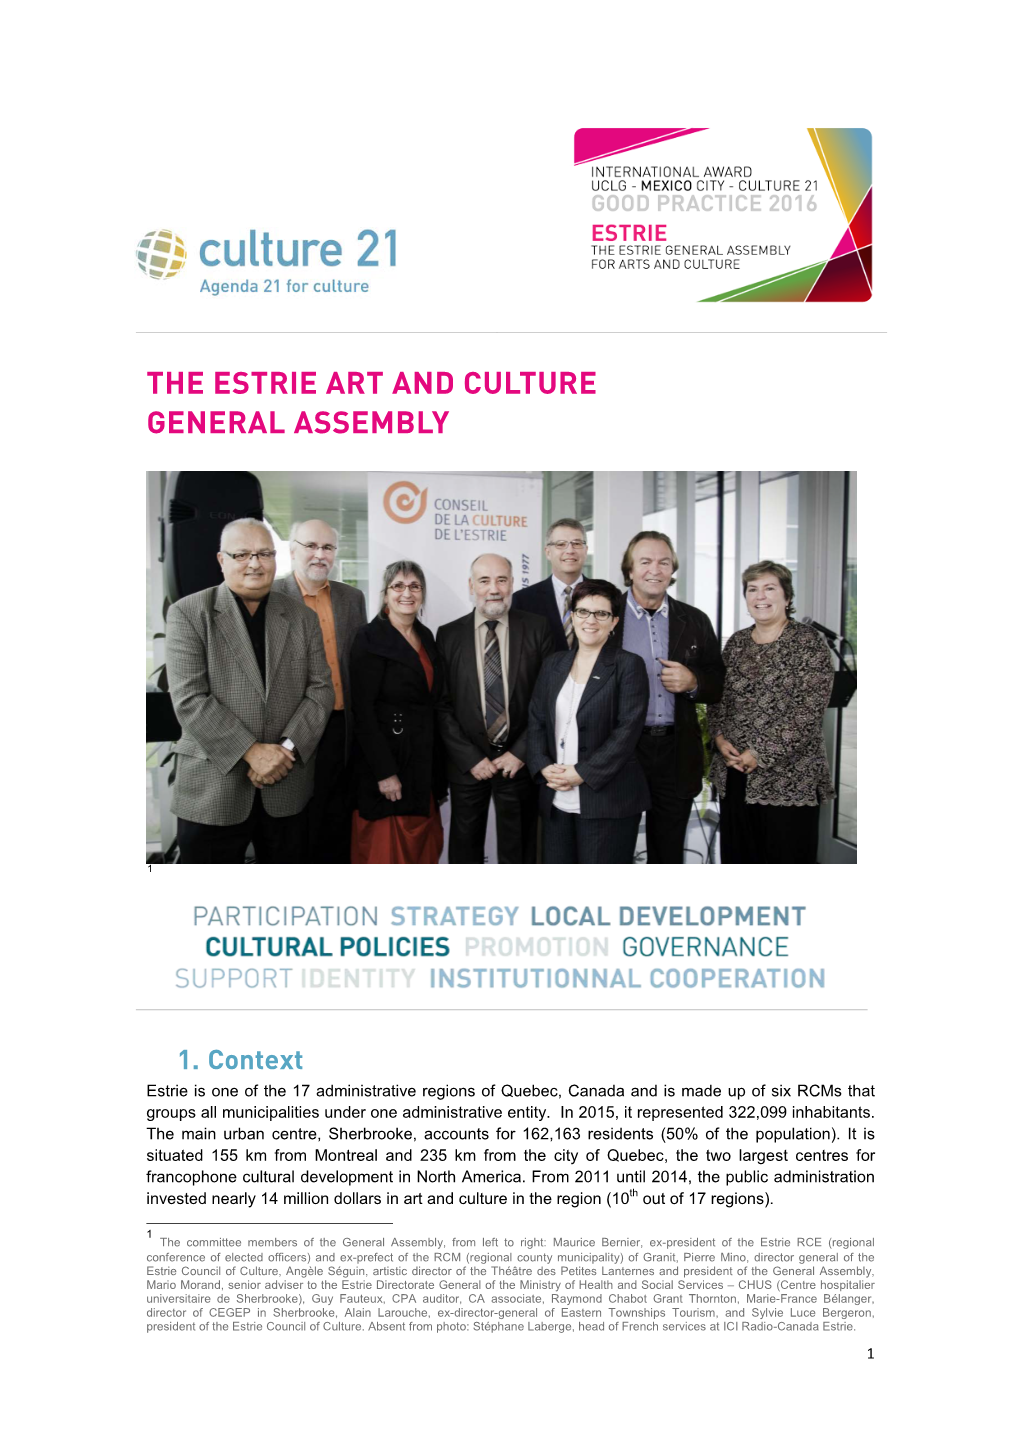 Estrie Art and Culture General Assembly